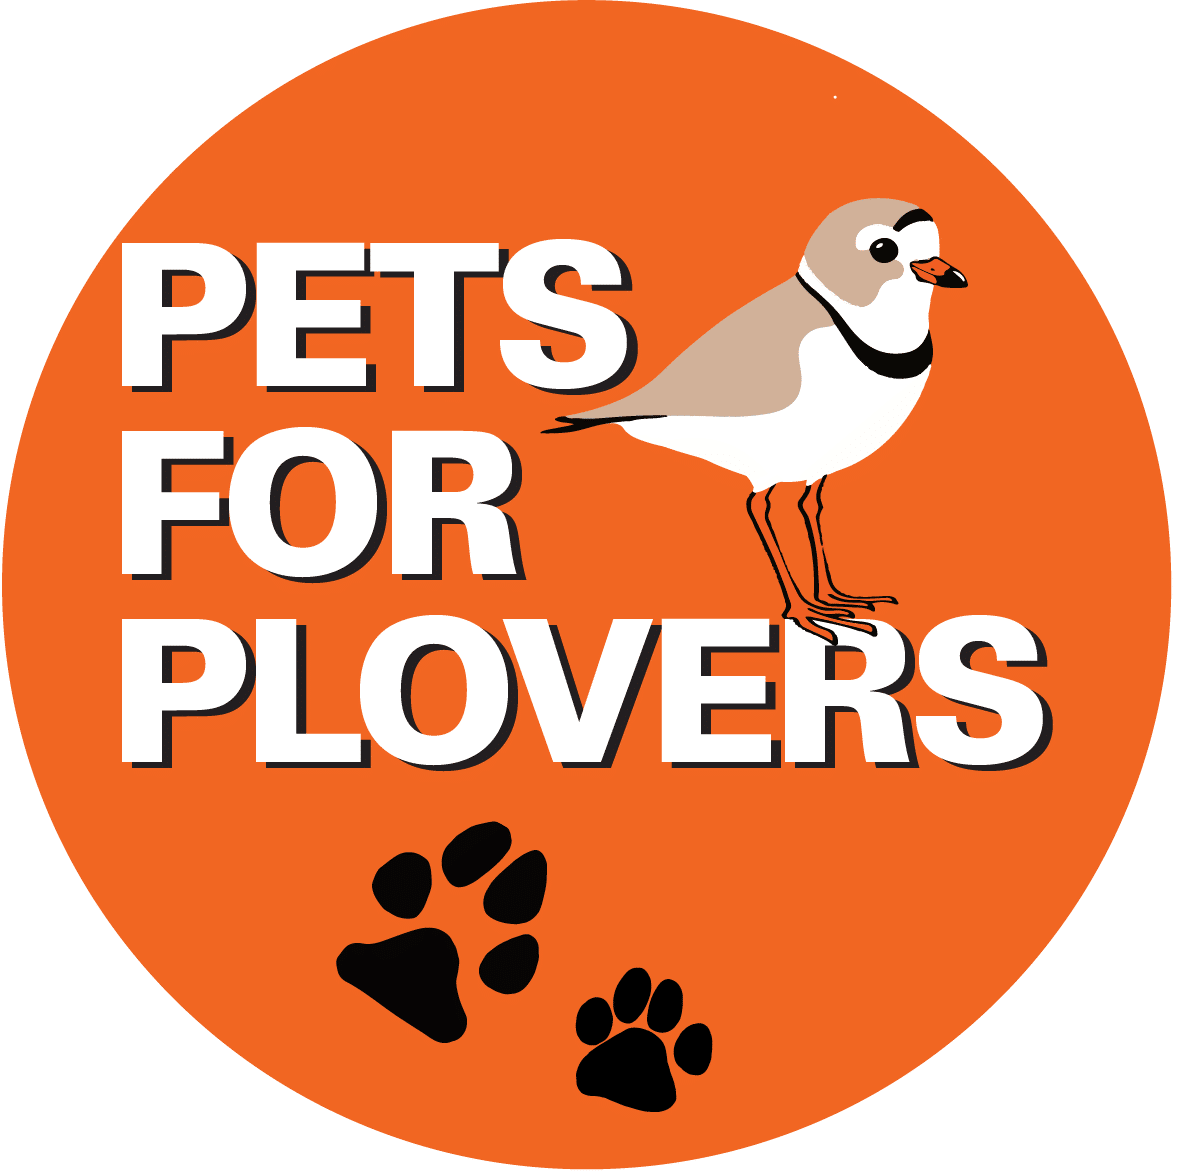 Pets for Plovers logo